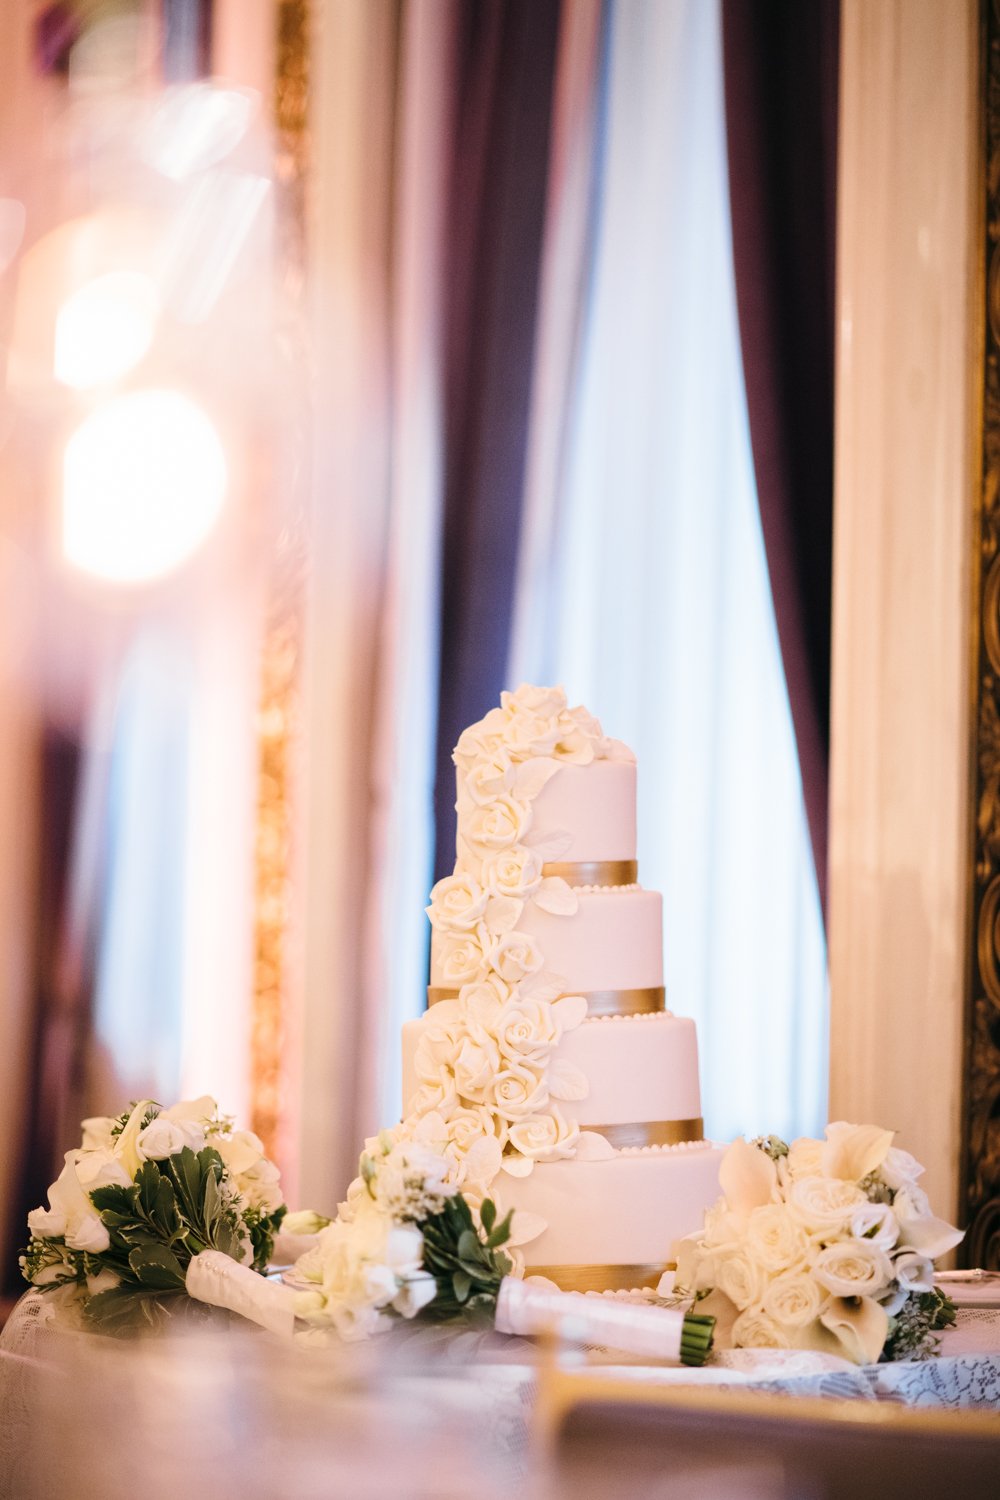 A four-tiered white wedding cake with floral designs sits on a table with white bouquets surrounding it.

Manhattan Luxury Wedding. New York Luxury Wedding Photographer. Wedding in Manhattan. NYC Luxury Wedding.